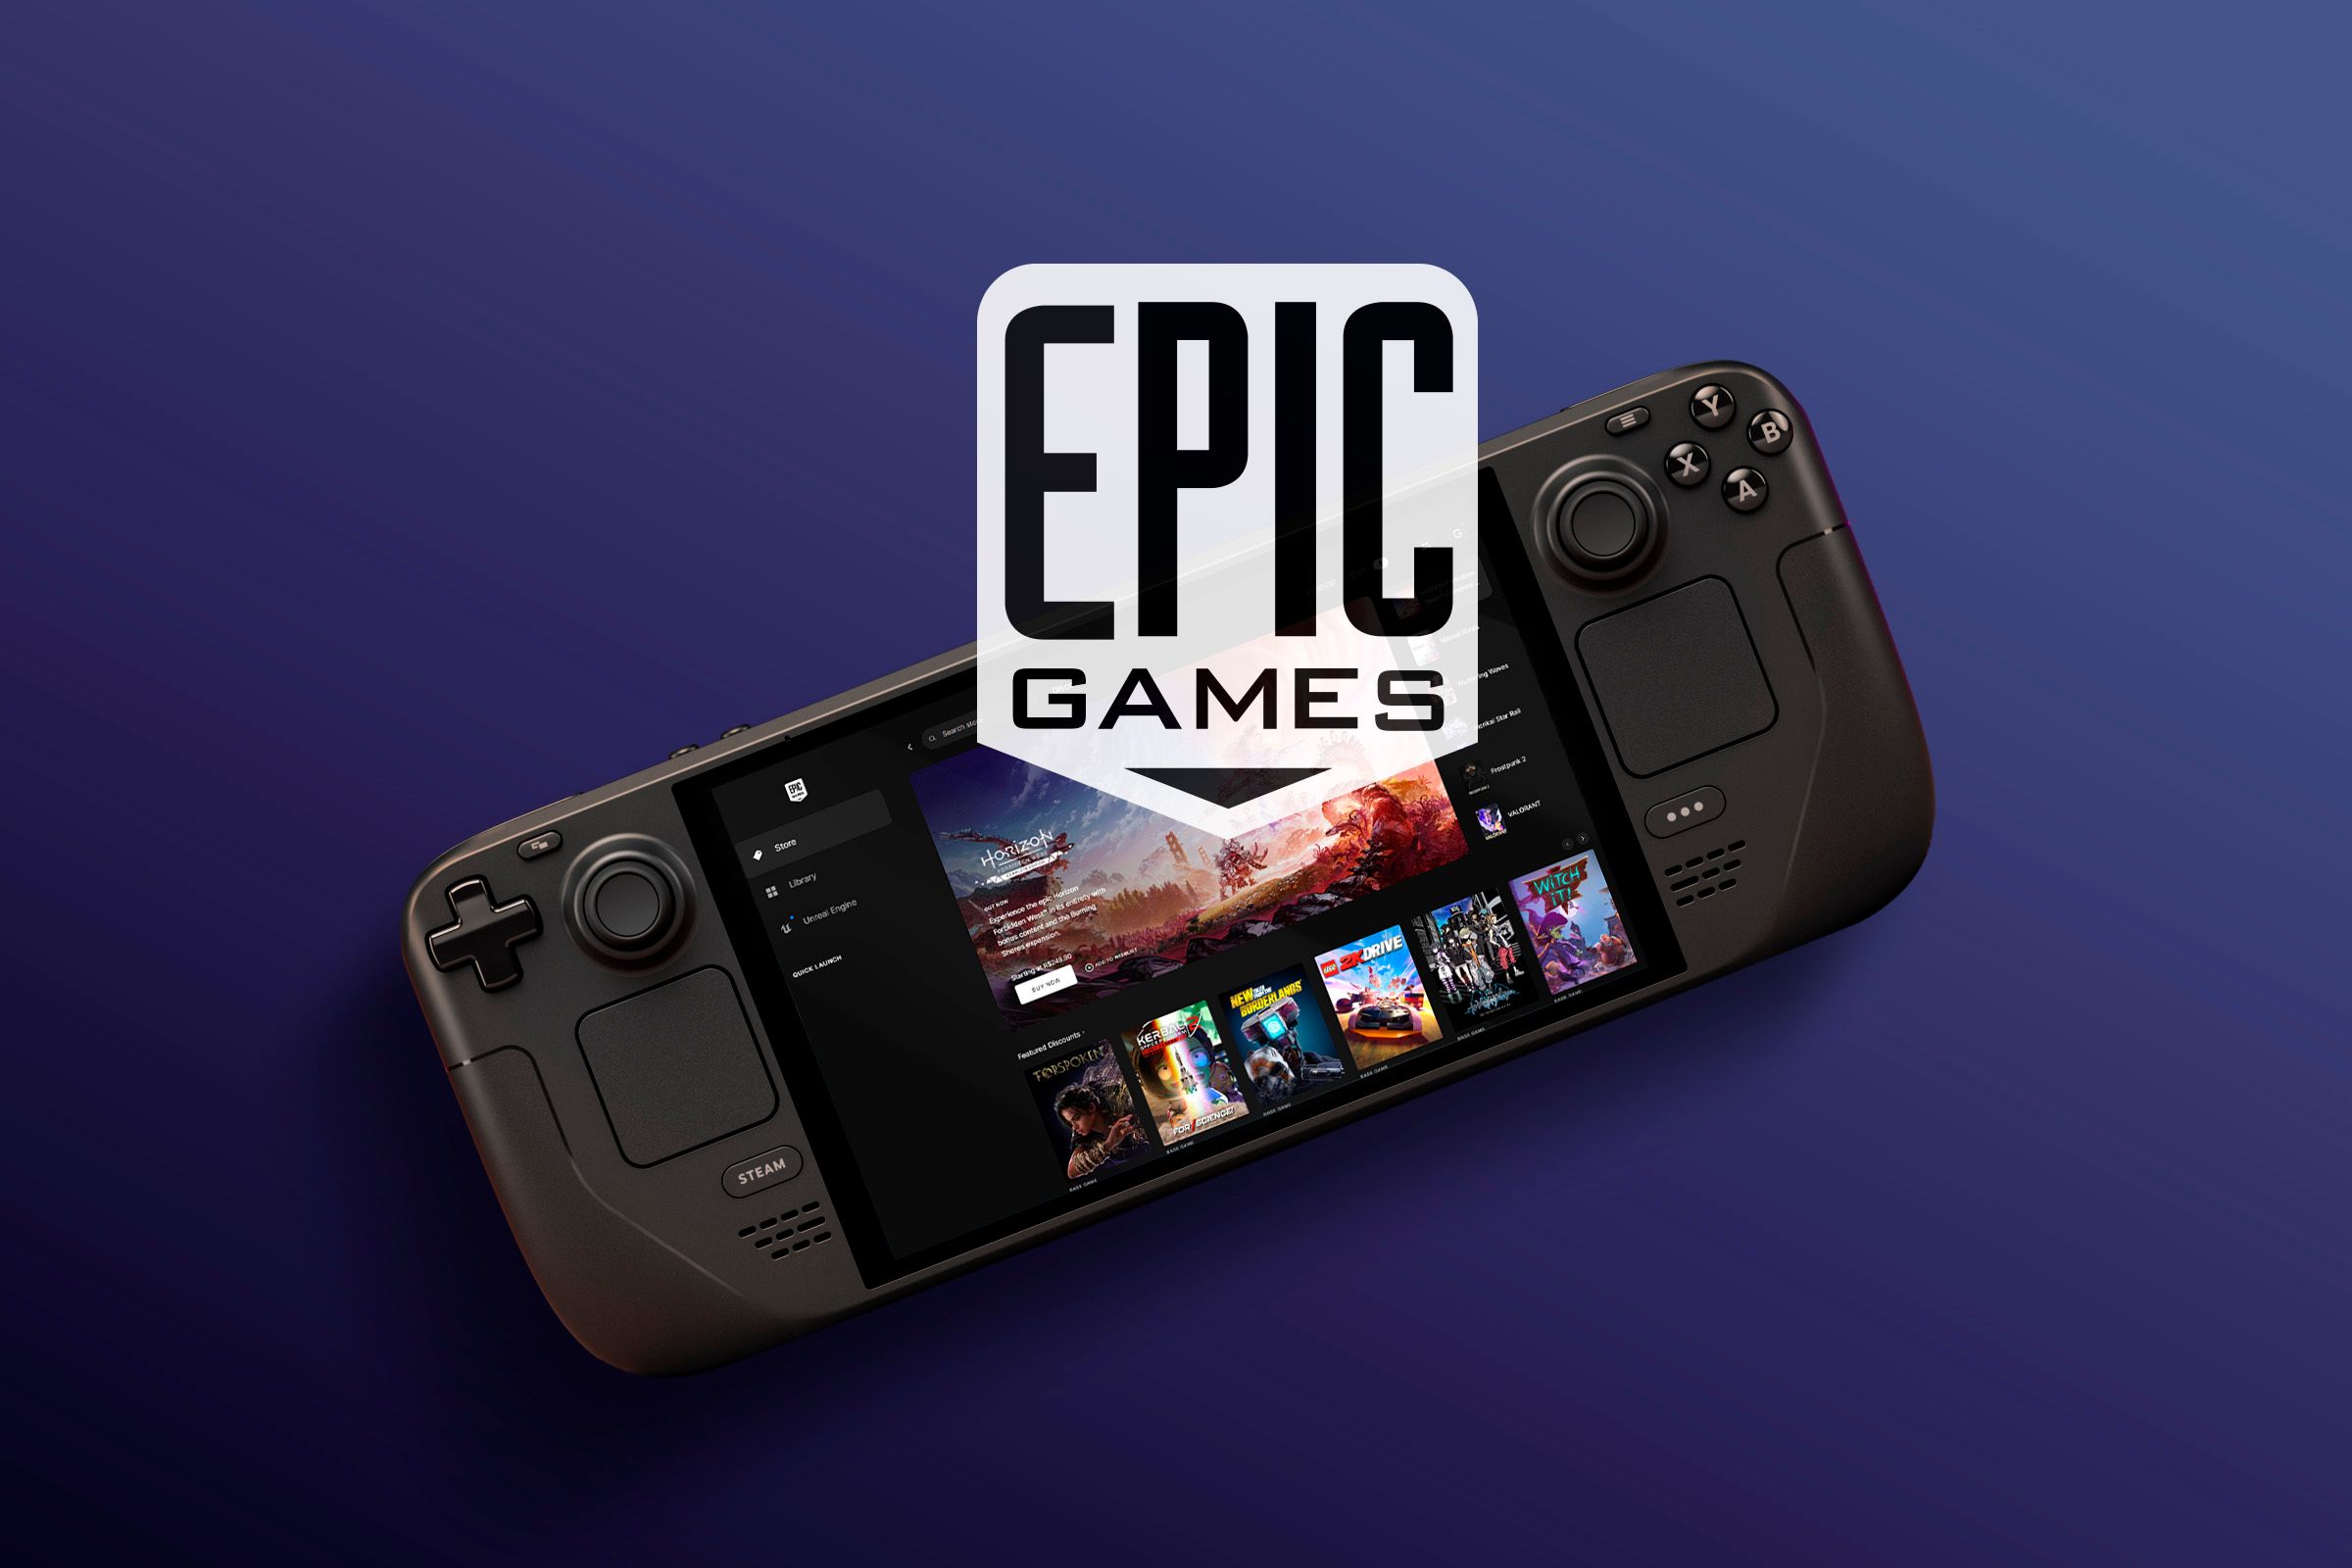 A Steam Deck with the Epic Games app on the screen and the Epic Games logo in the center.